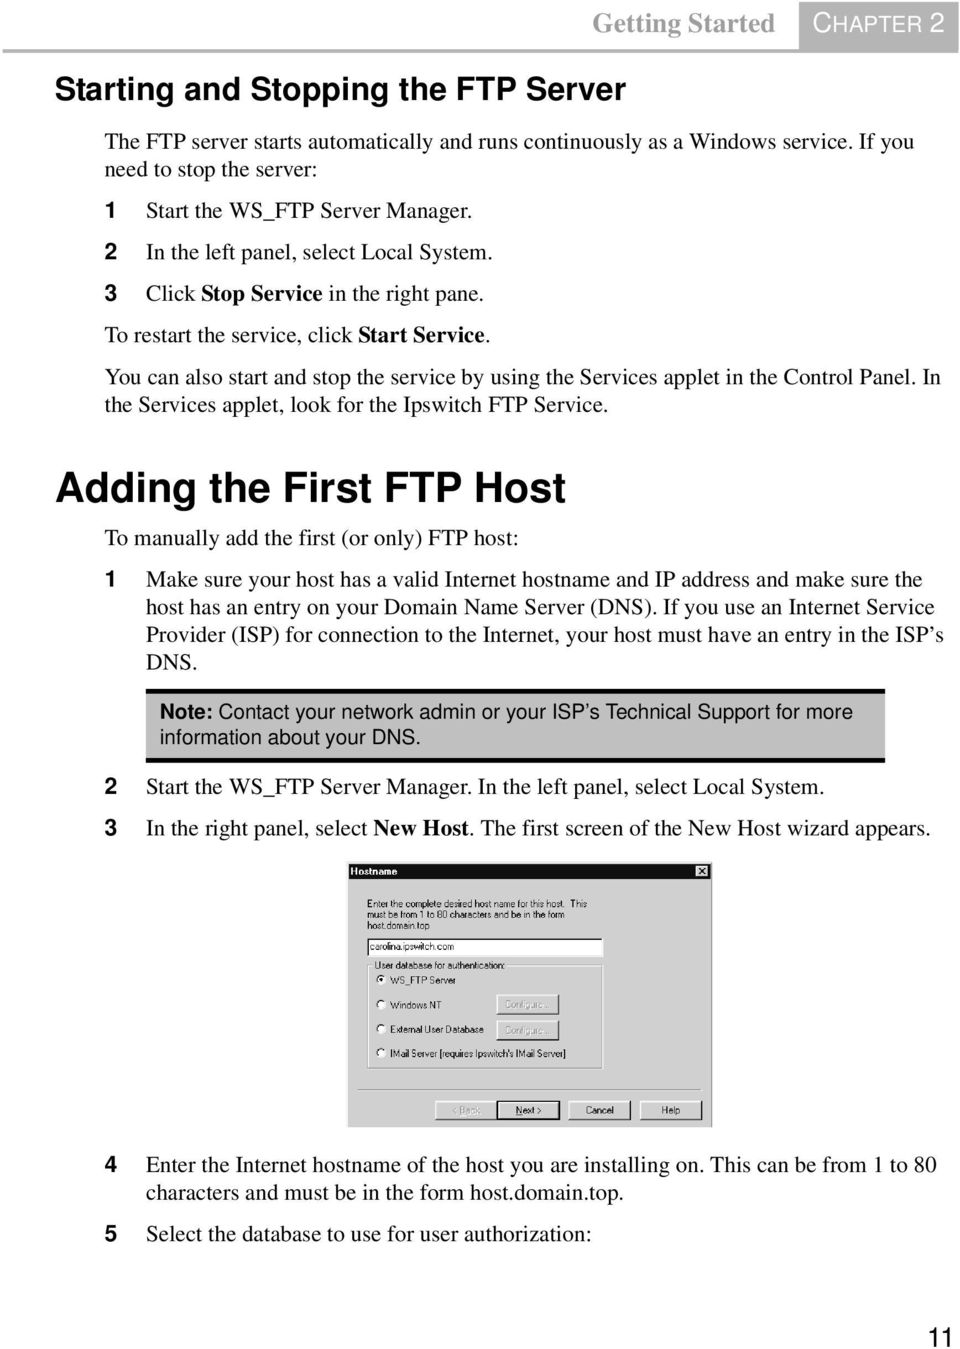 You can also start and stop the service by using the Services applet in the Control Panel. In the Services applet, look for the Ipswitch FTP Service.